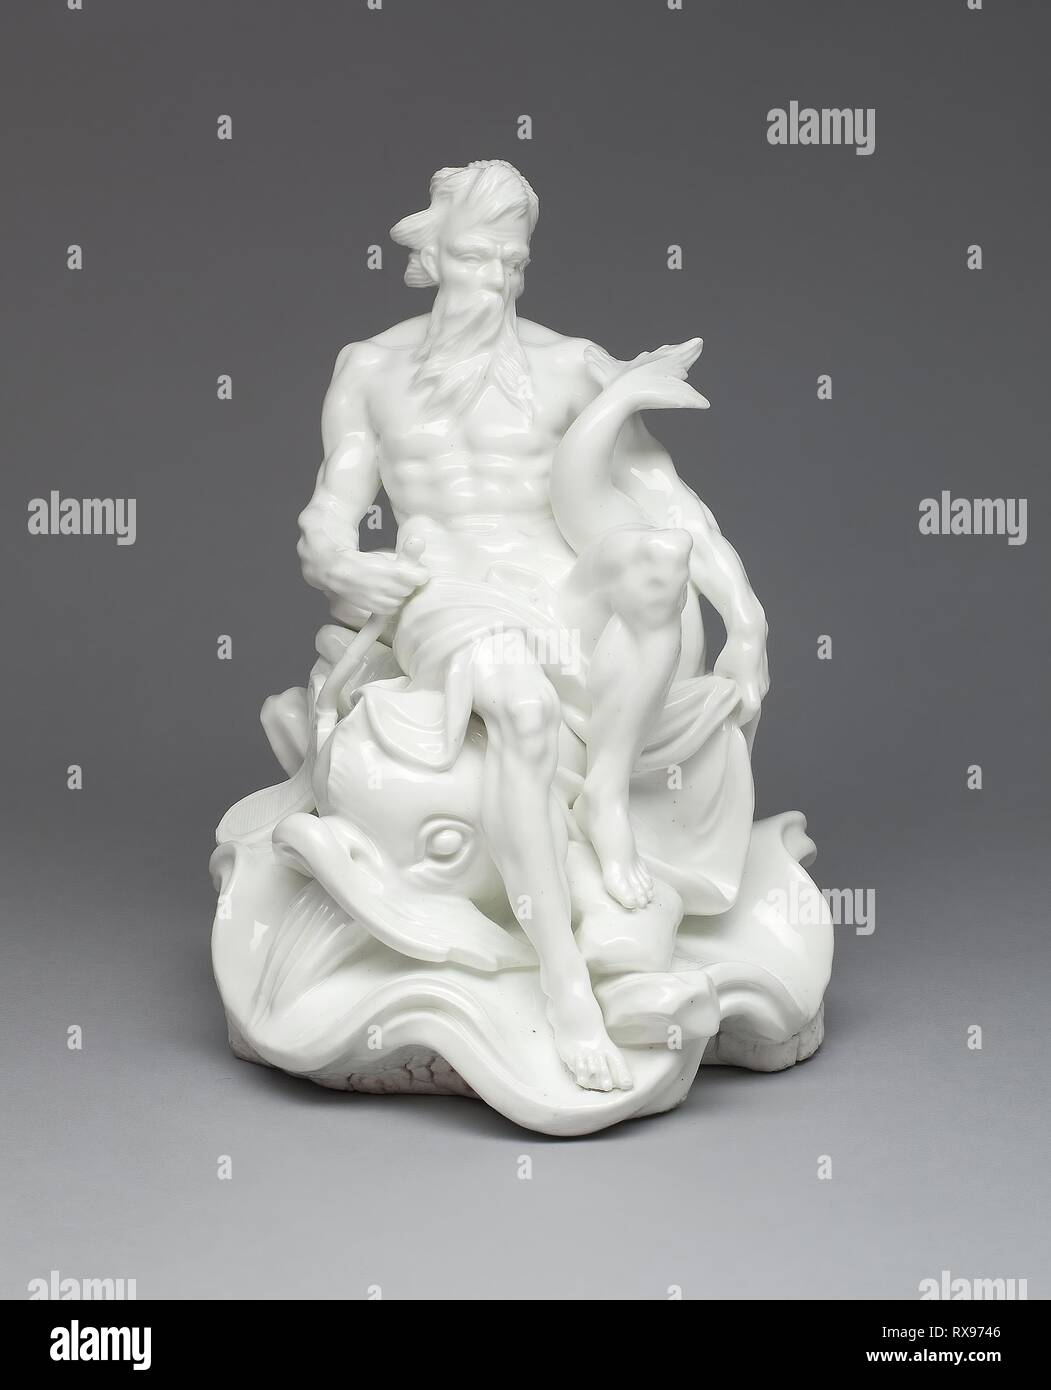 Figure of a River God (Fleuve). Vincennes Porcelain Manufactory; French, founded 1740 (known as Sevres from 1756); Model by: Louis Antoine Fournier (possibly); French, active c. 1746-52. Date: 1747-1750. Dimensions: H. 31 cm (12 3/16 in.). Soft-paste porcelain. Origin: Vincennes. Museum: The Chicago Art Institute. Author: Manufacture de porcelaine de Vincennes. Stock Photo